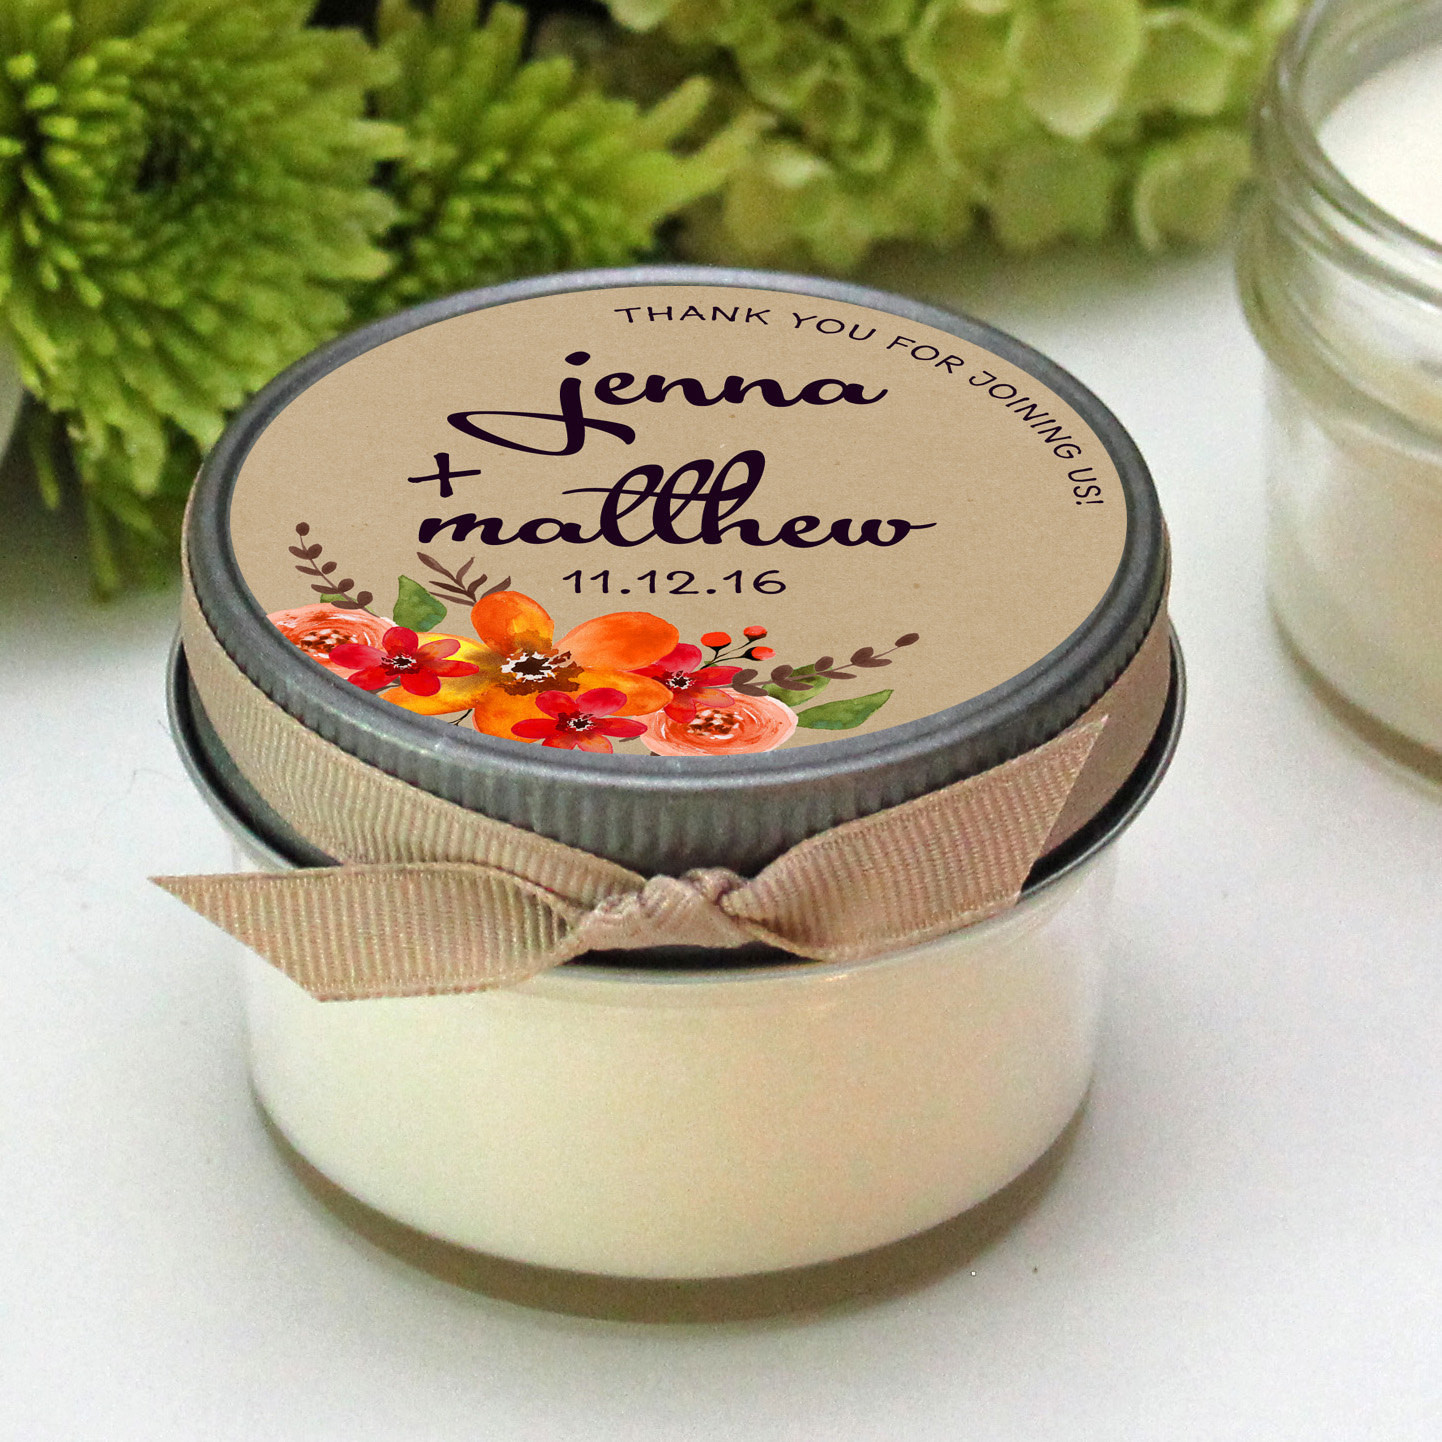 Wedding Candle Favors
 Wedding Favor Candles Fall Bouquet Label Design Fall